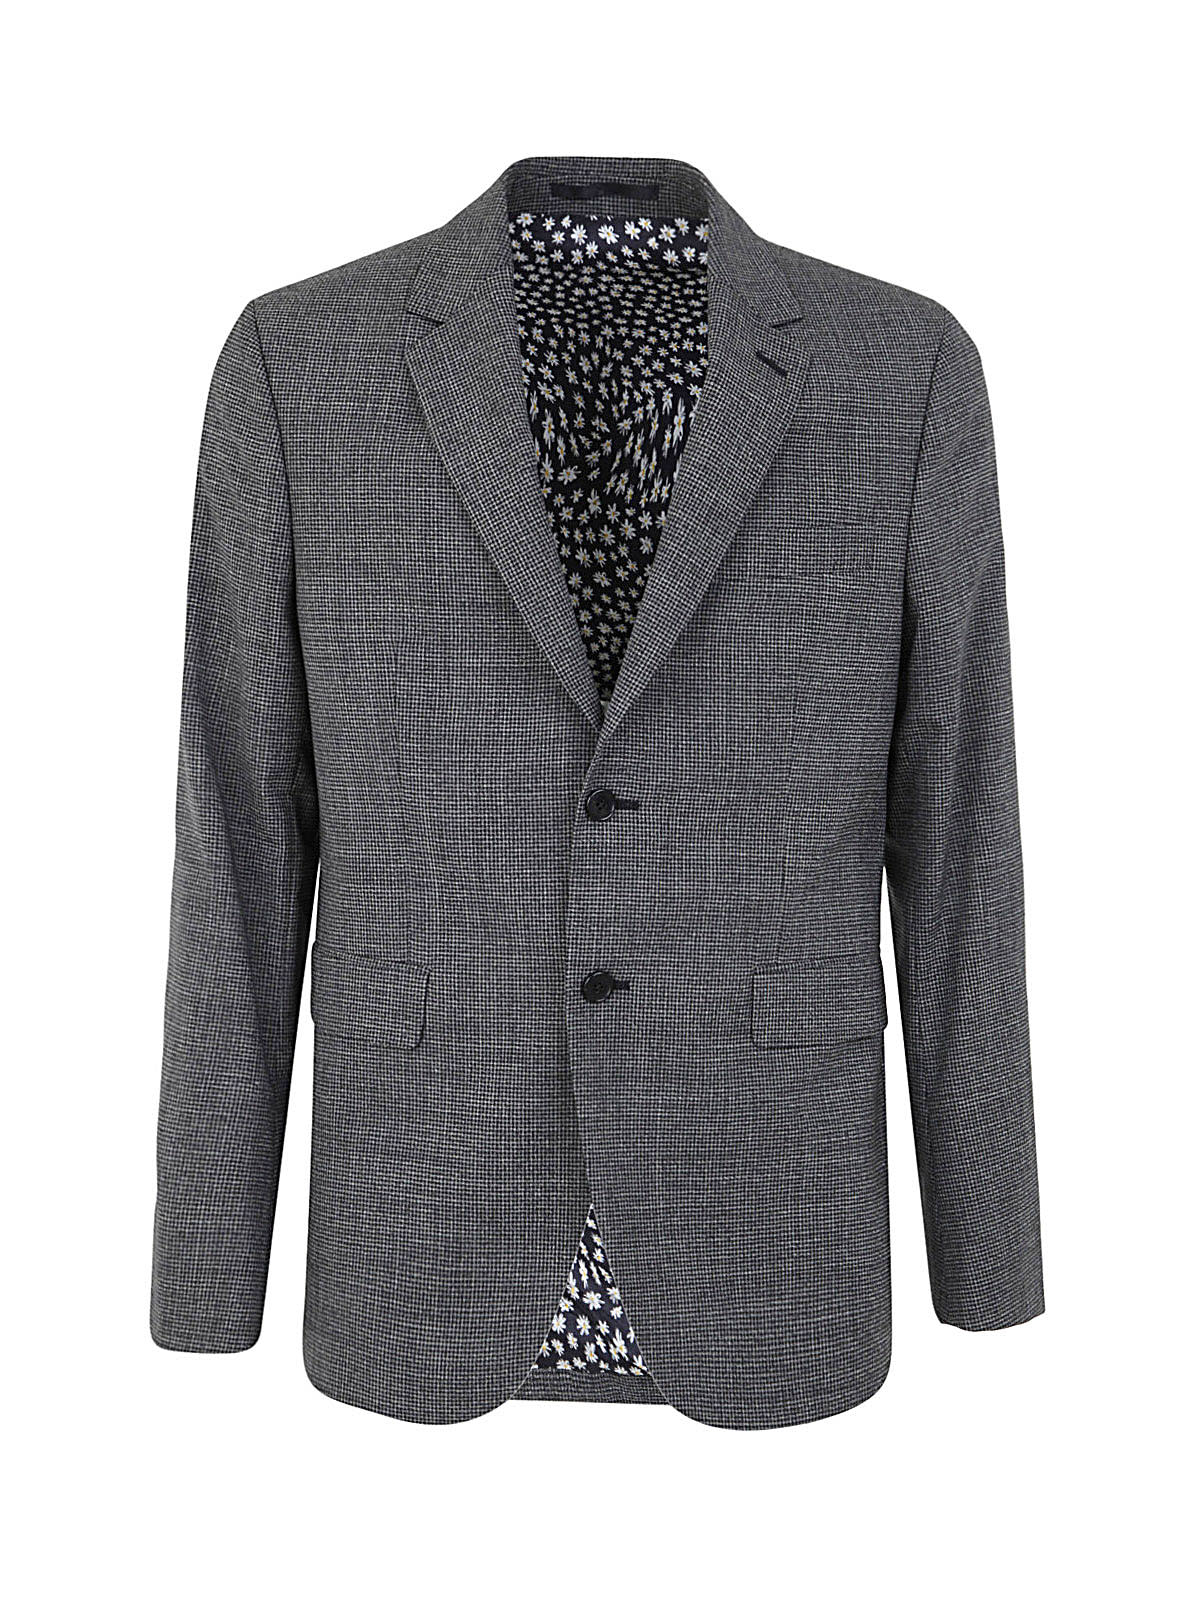 Paul Smith Gents Two Button Jacket